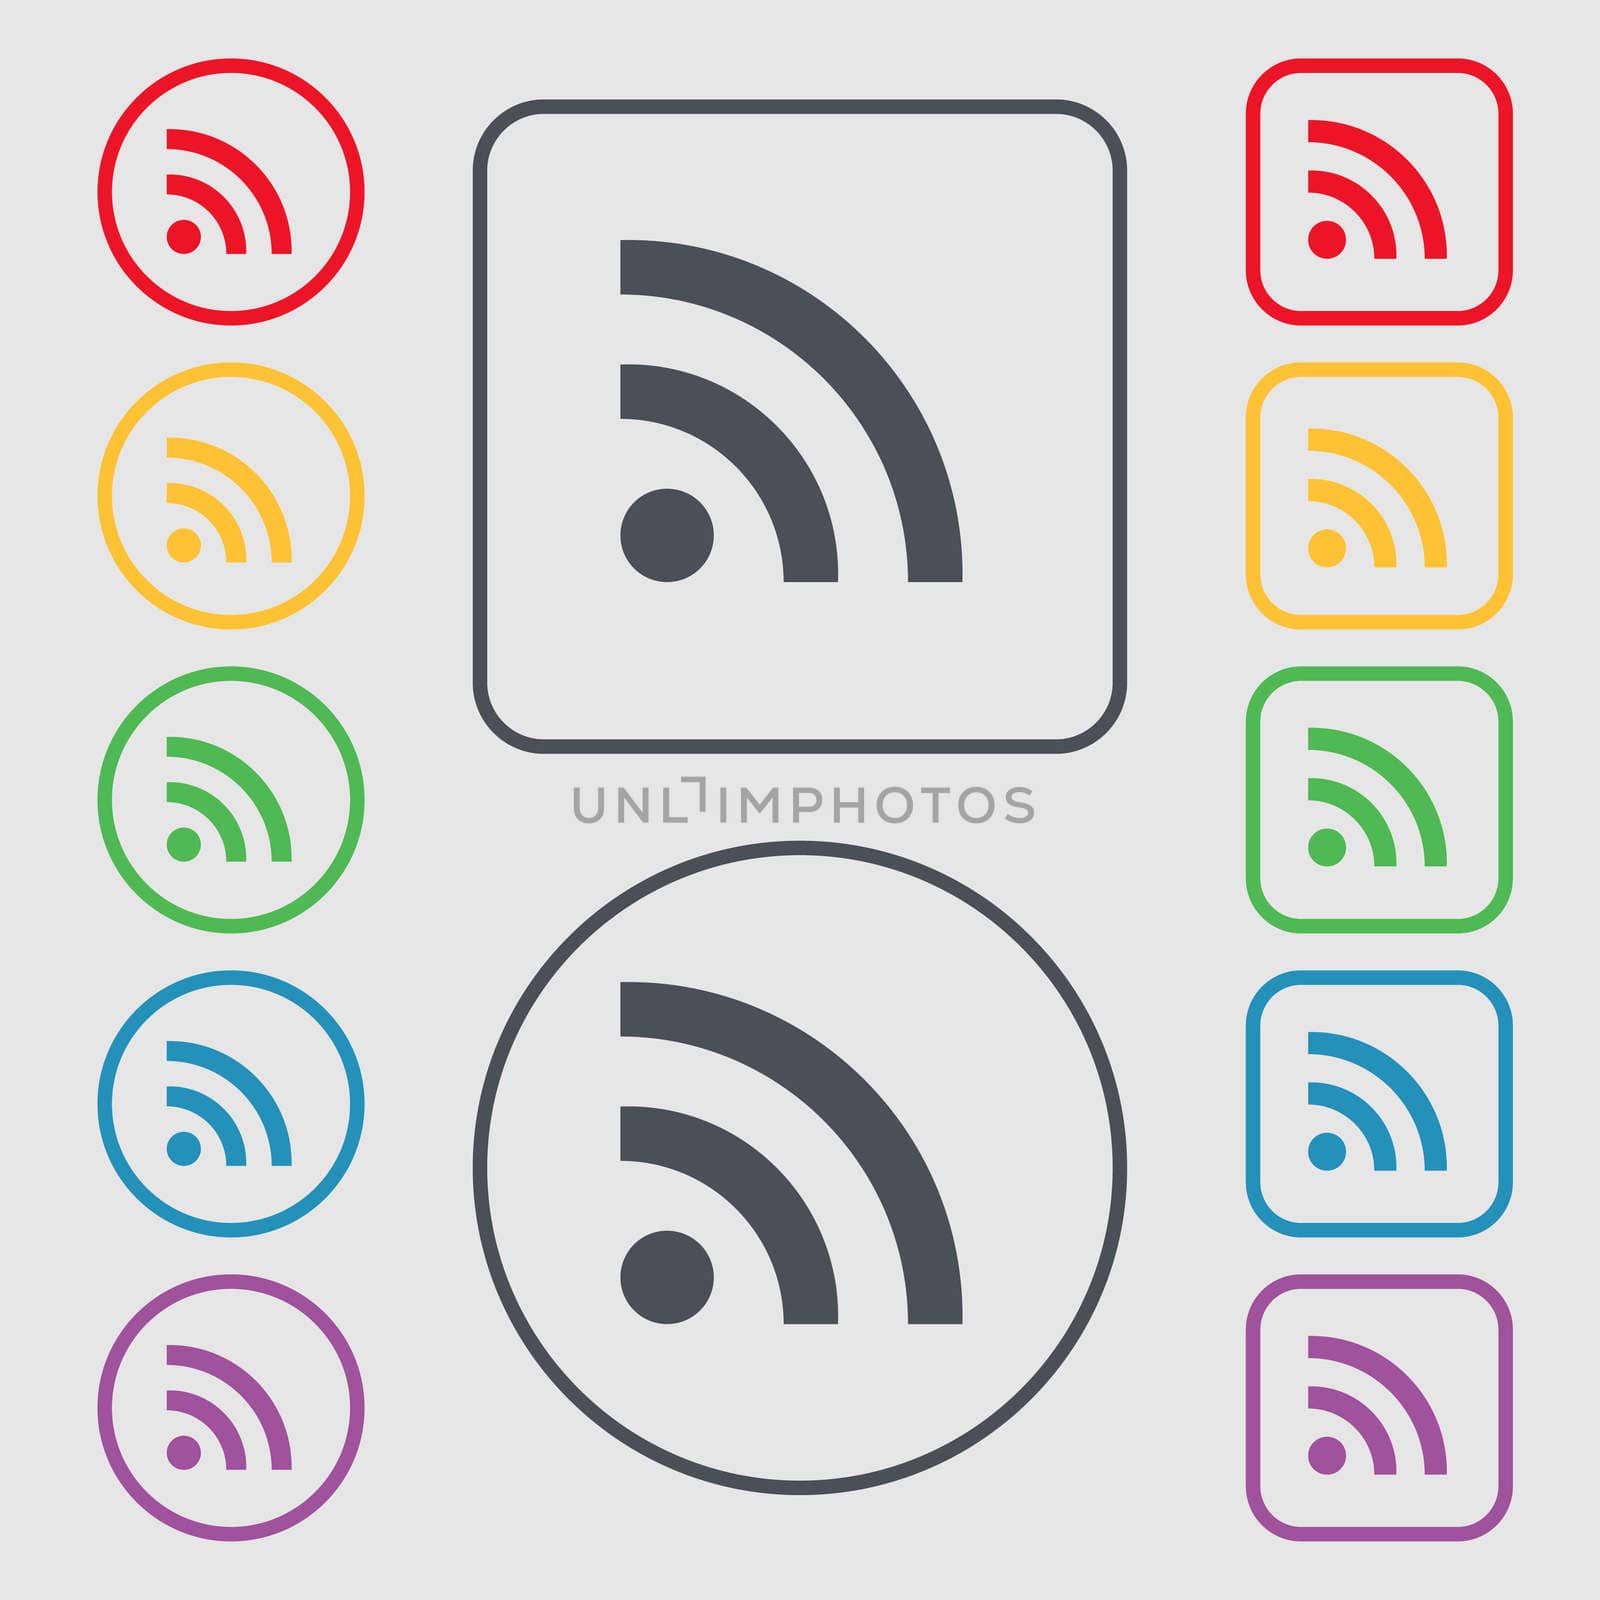 Wifi, Wi-fi, Wireless Network icon sign. symbol on the Round and square buttons with frame. illustration